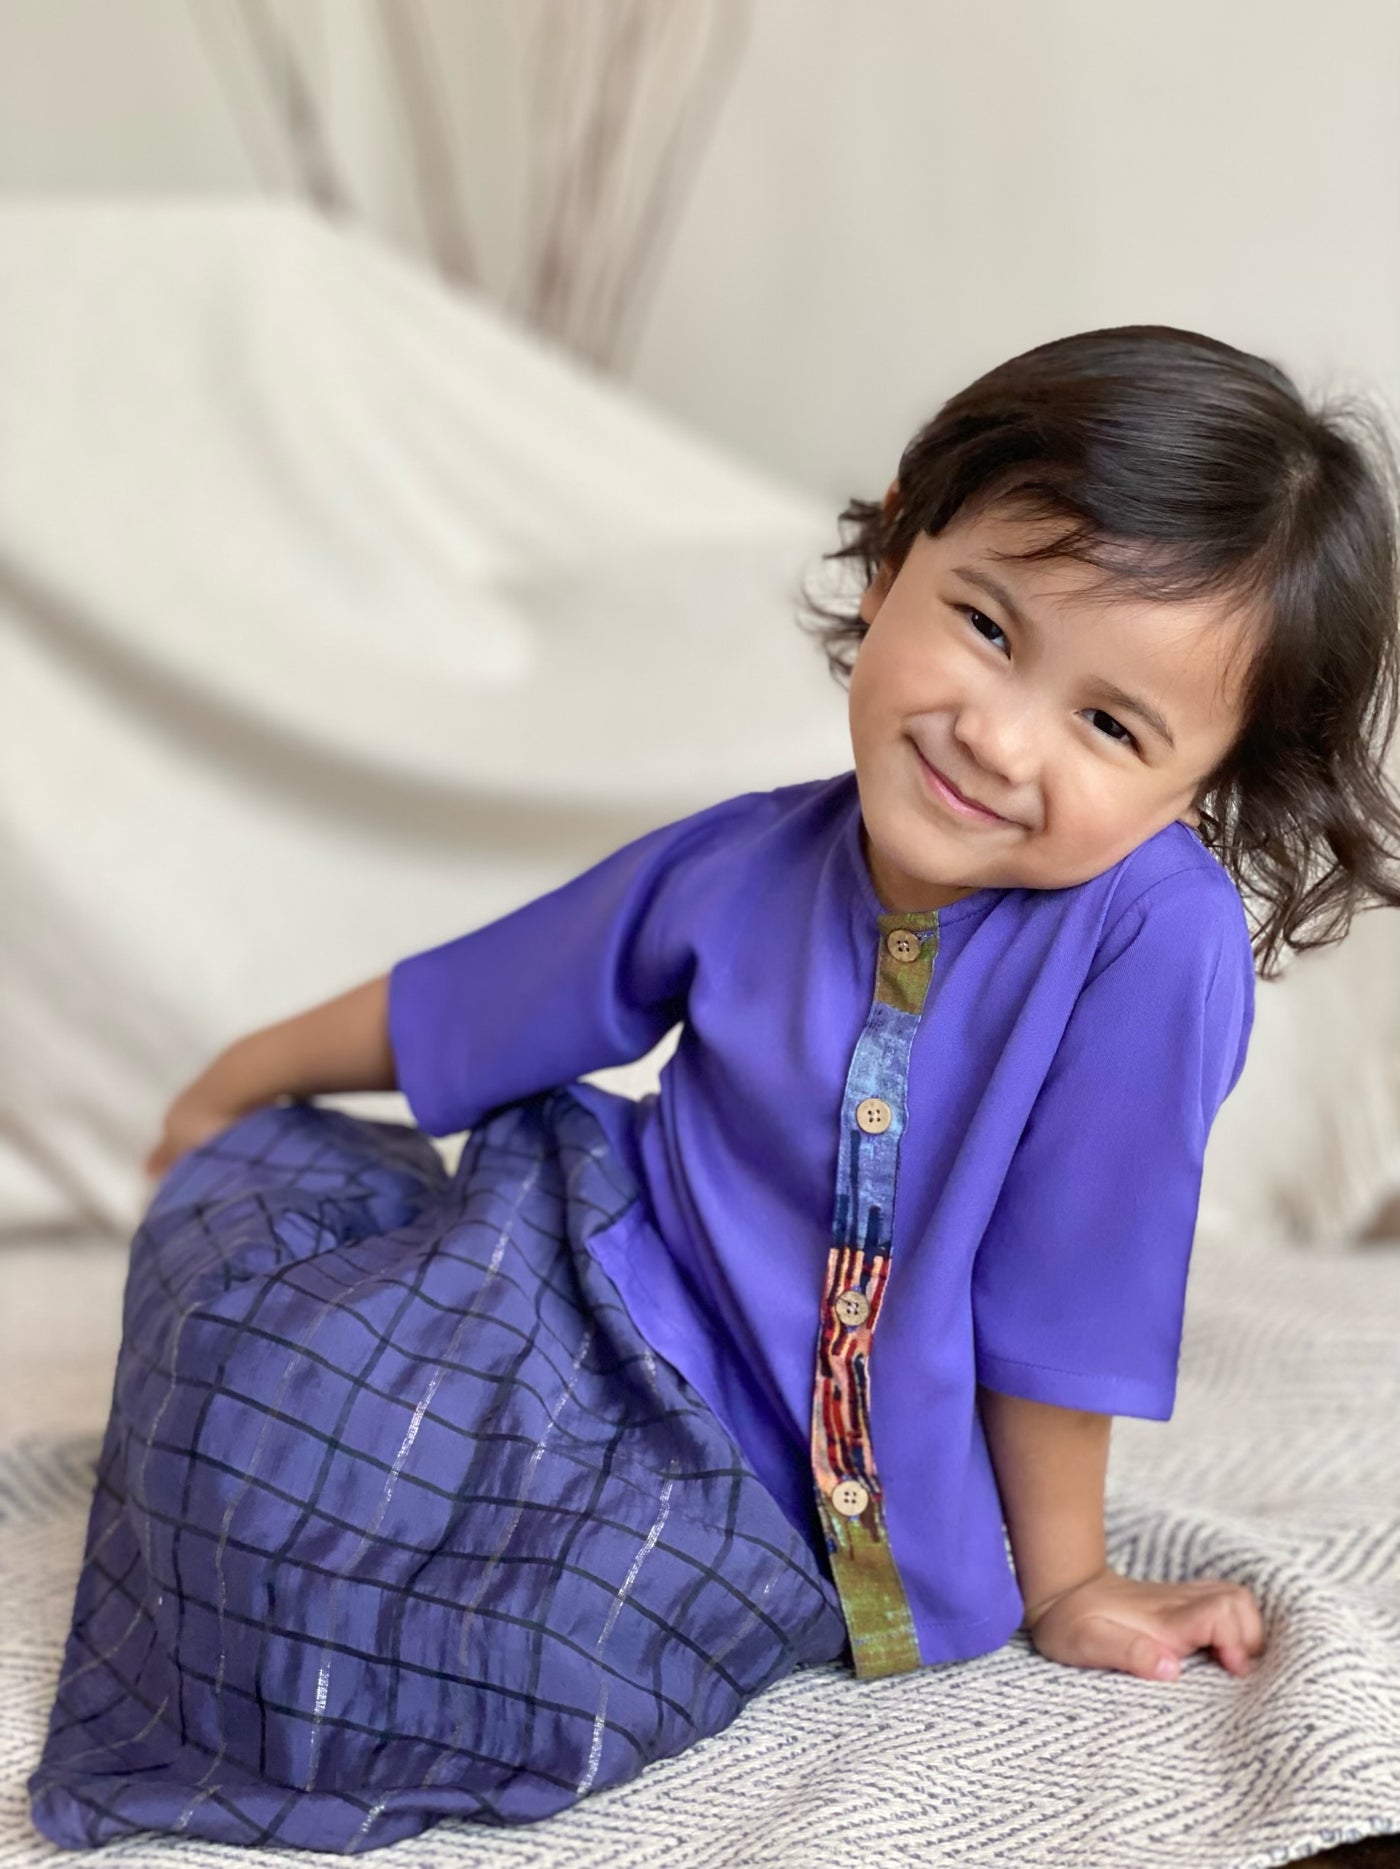 TARI Baby's Blouse with Flared Skirt Set in Purple